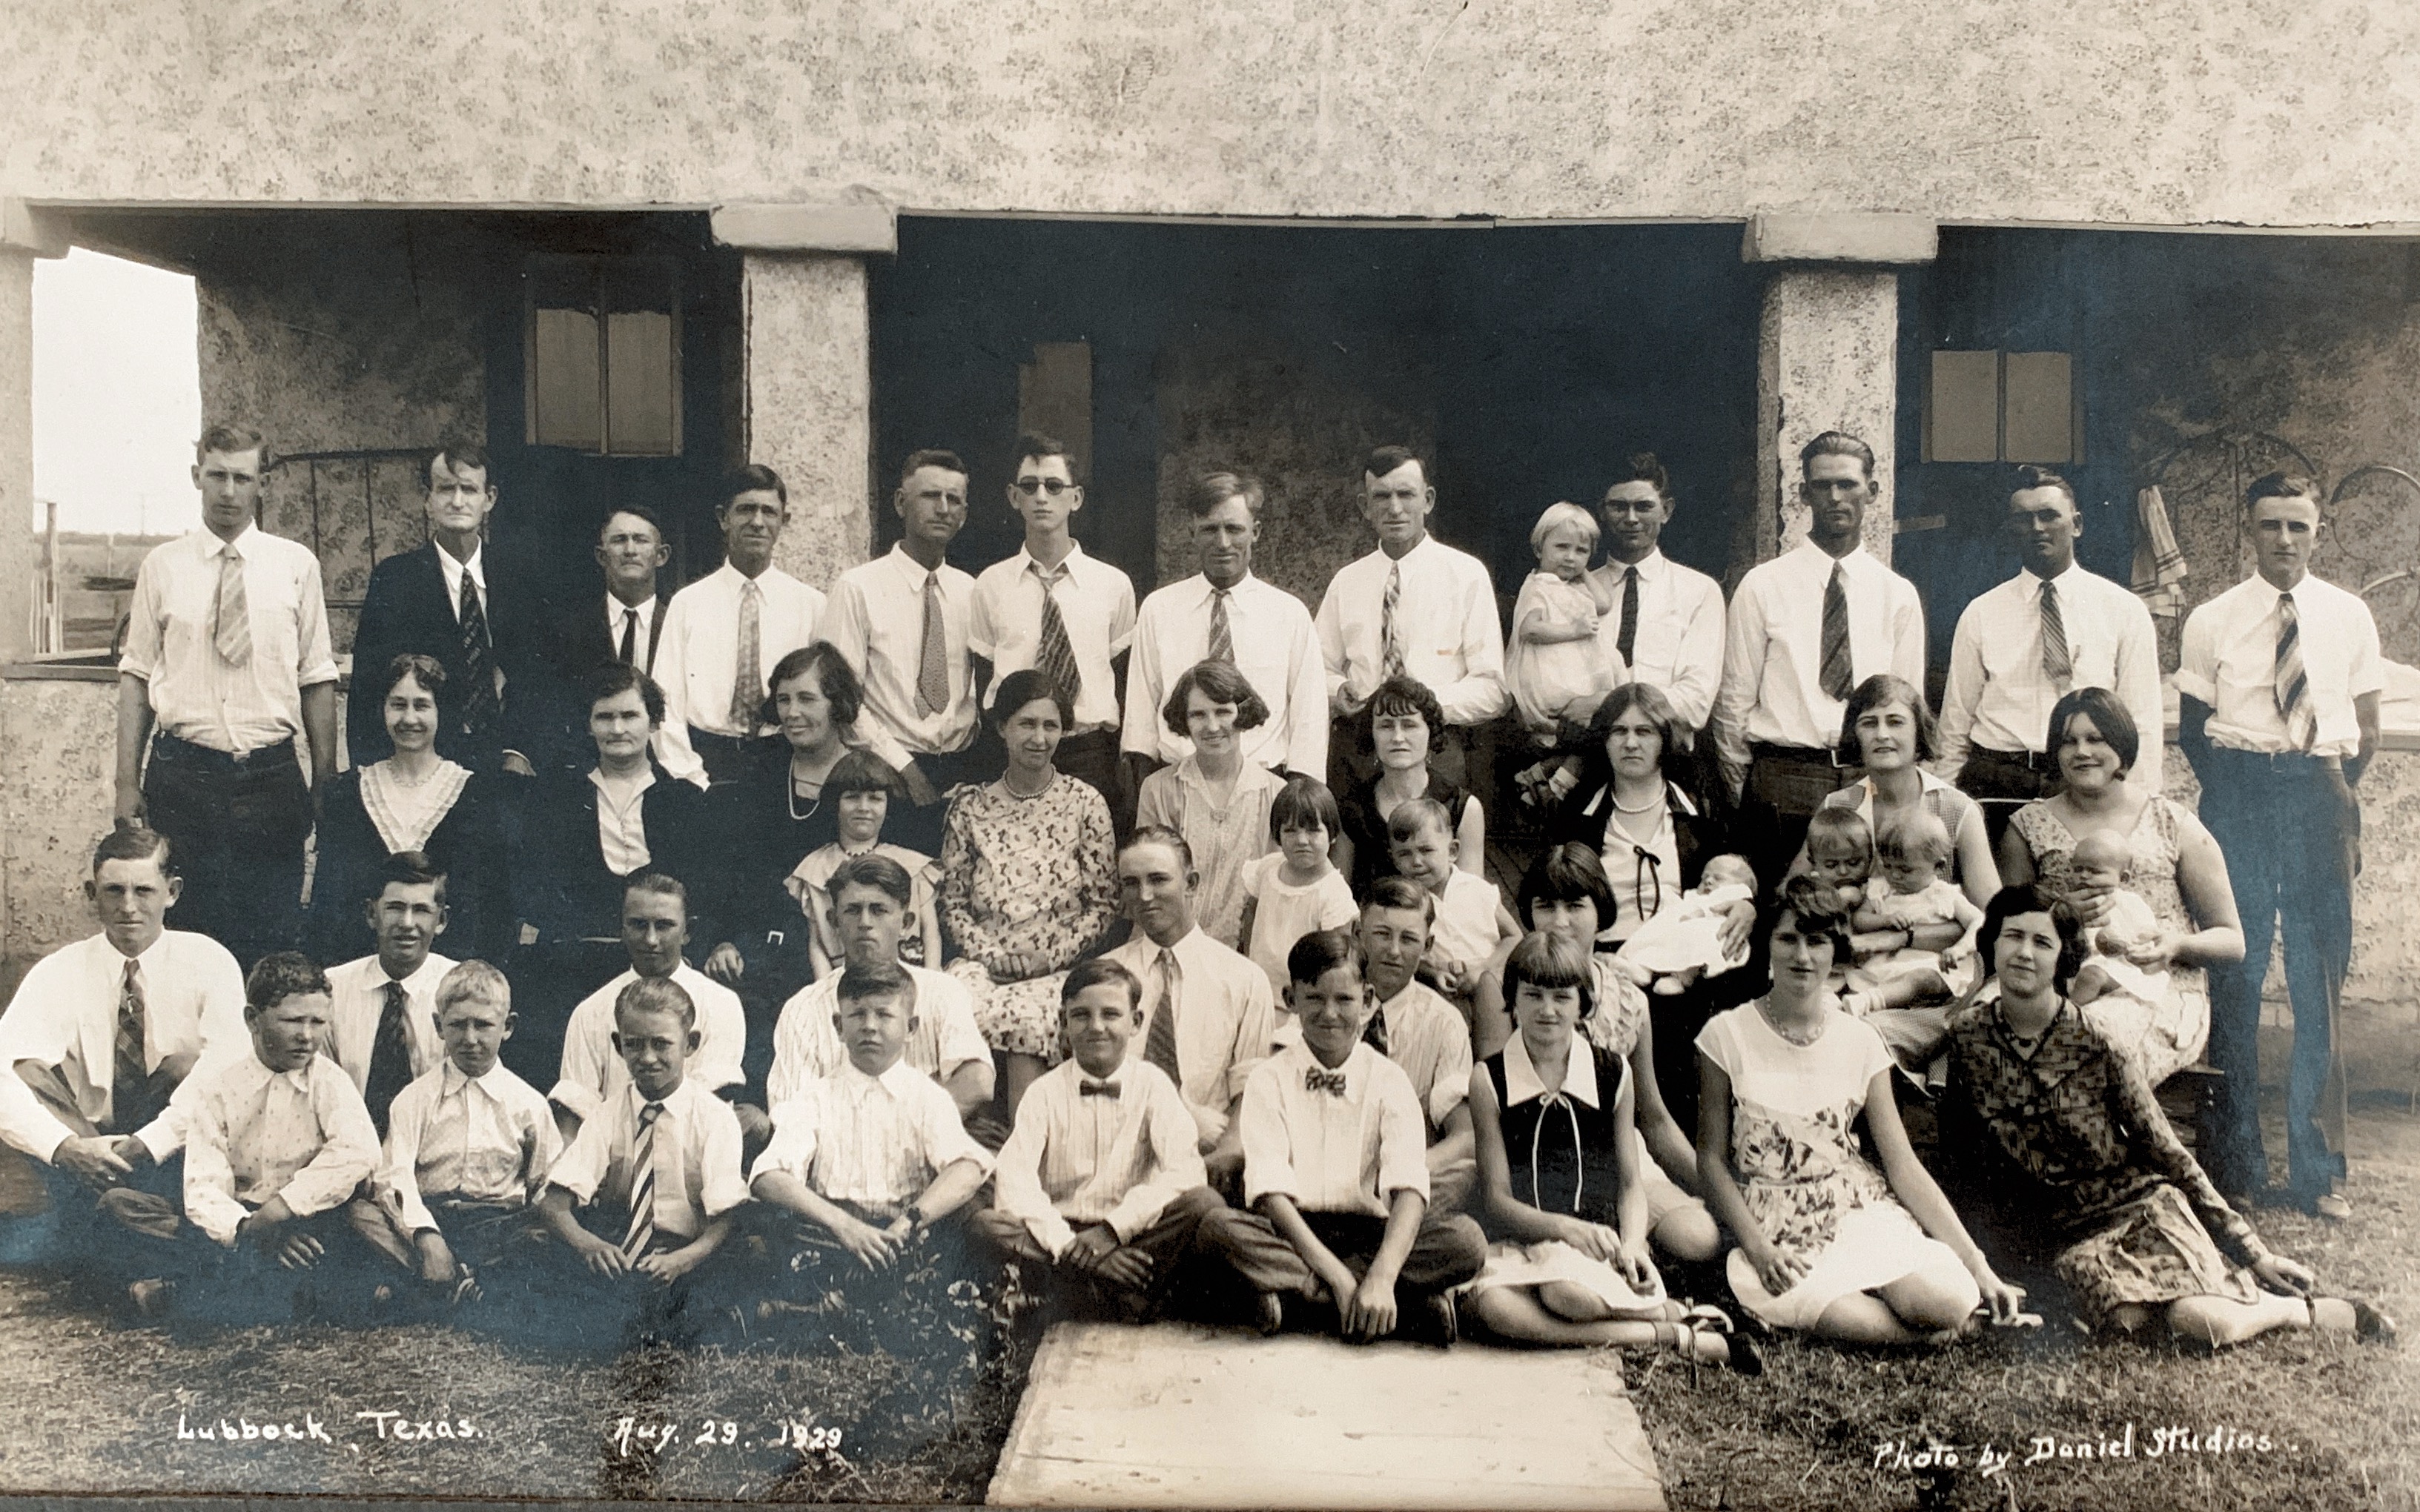 Traweek and Dobbins family reunion August 1929.